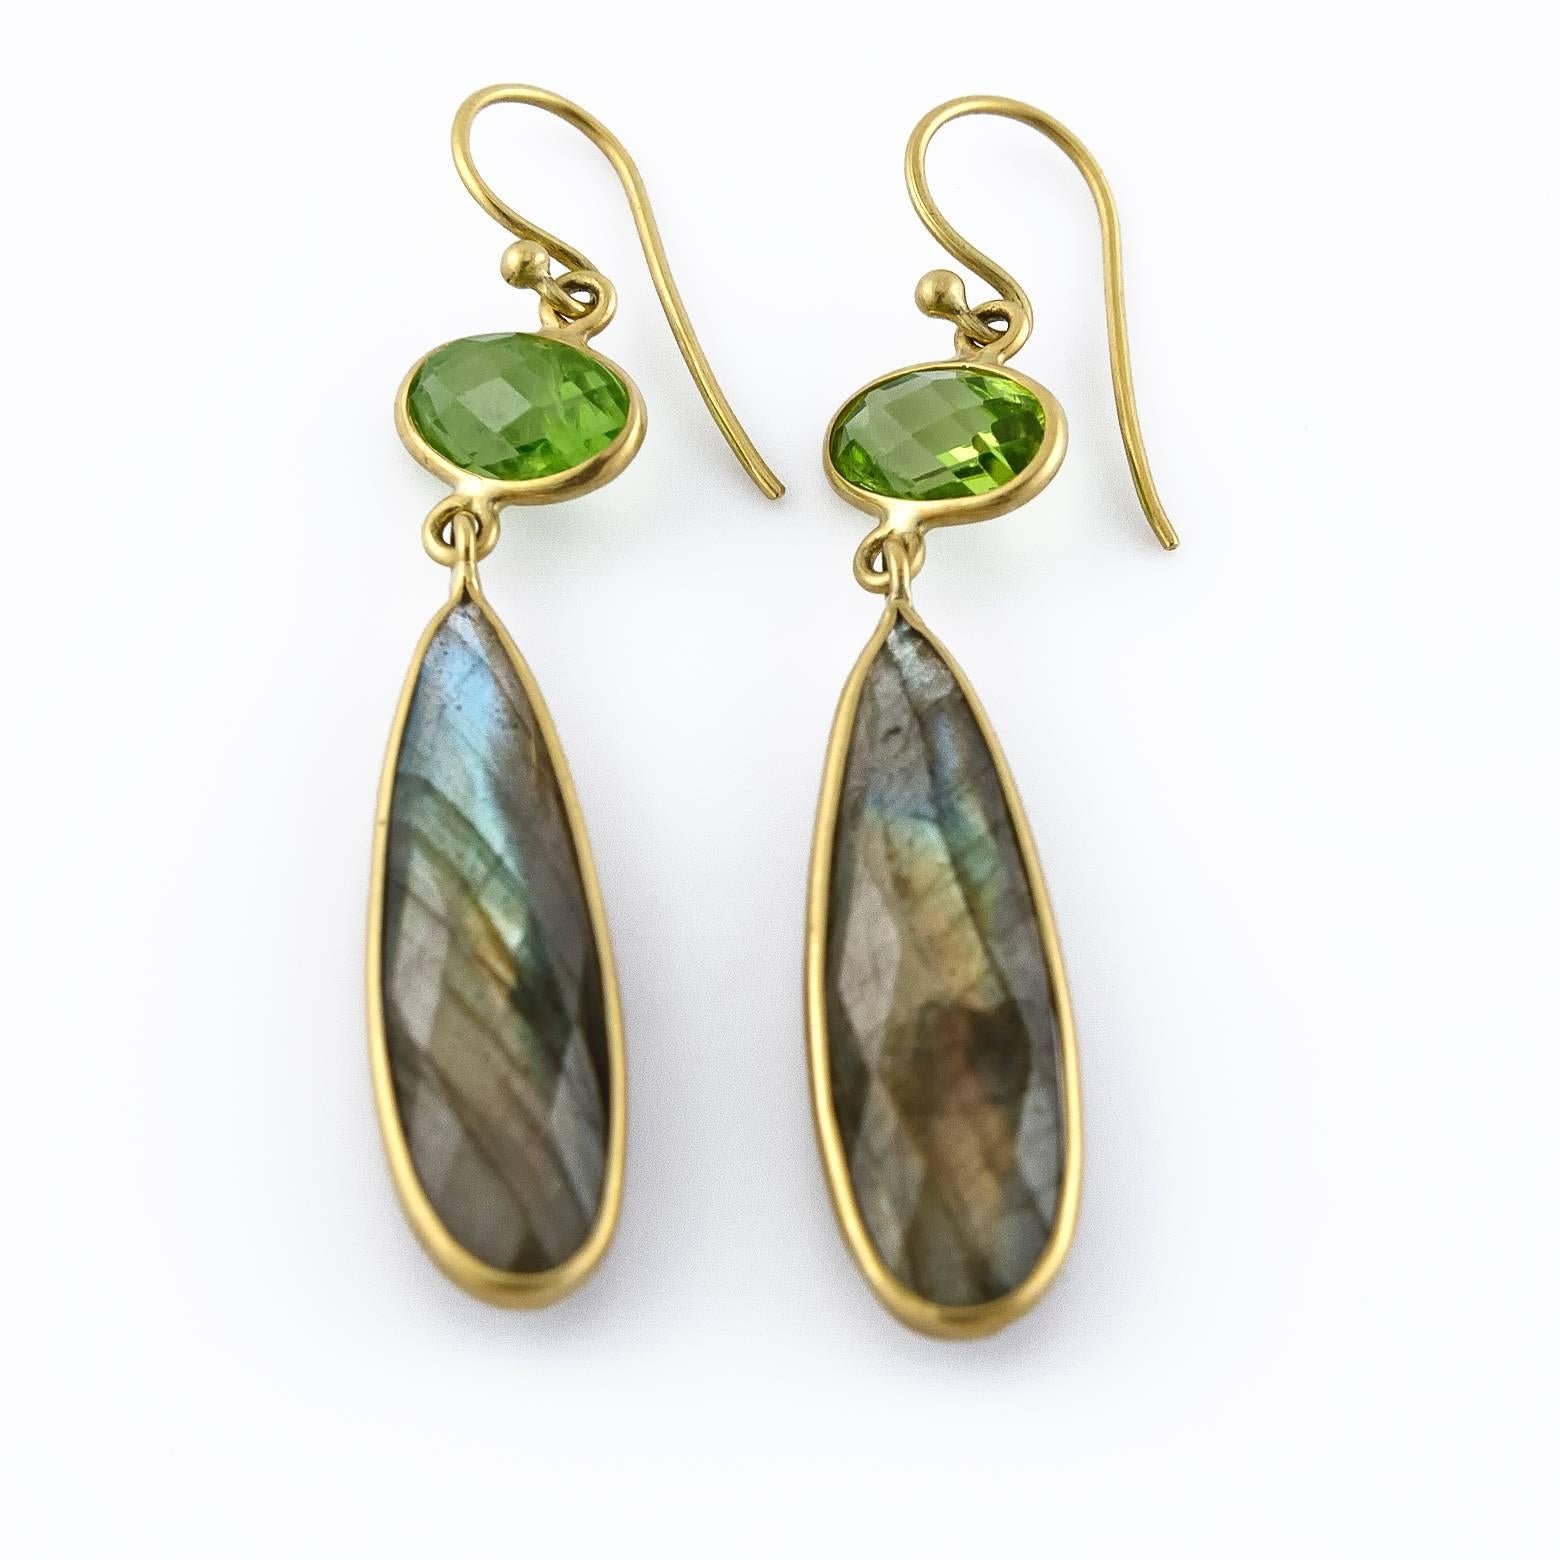 These elegant and sophisticated earrings have bright green peridot eyes that glimmer and shine atop long tear drop labradorites. High quality labradorites, rose cut with the high reflective labradoressence that is so characteristic of this marvelous